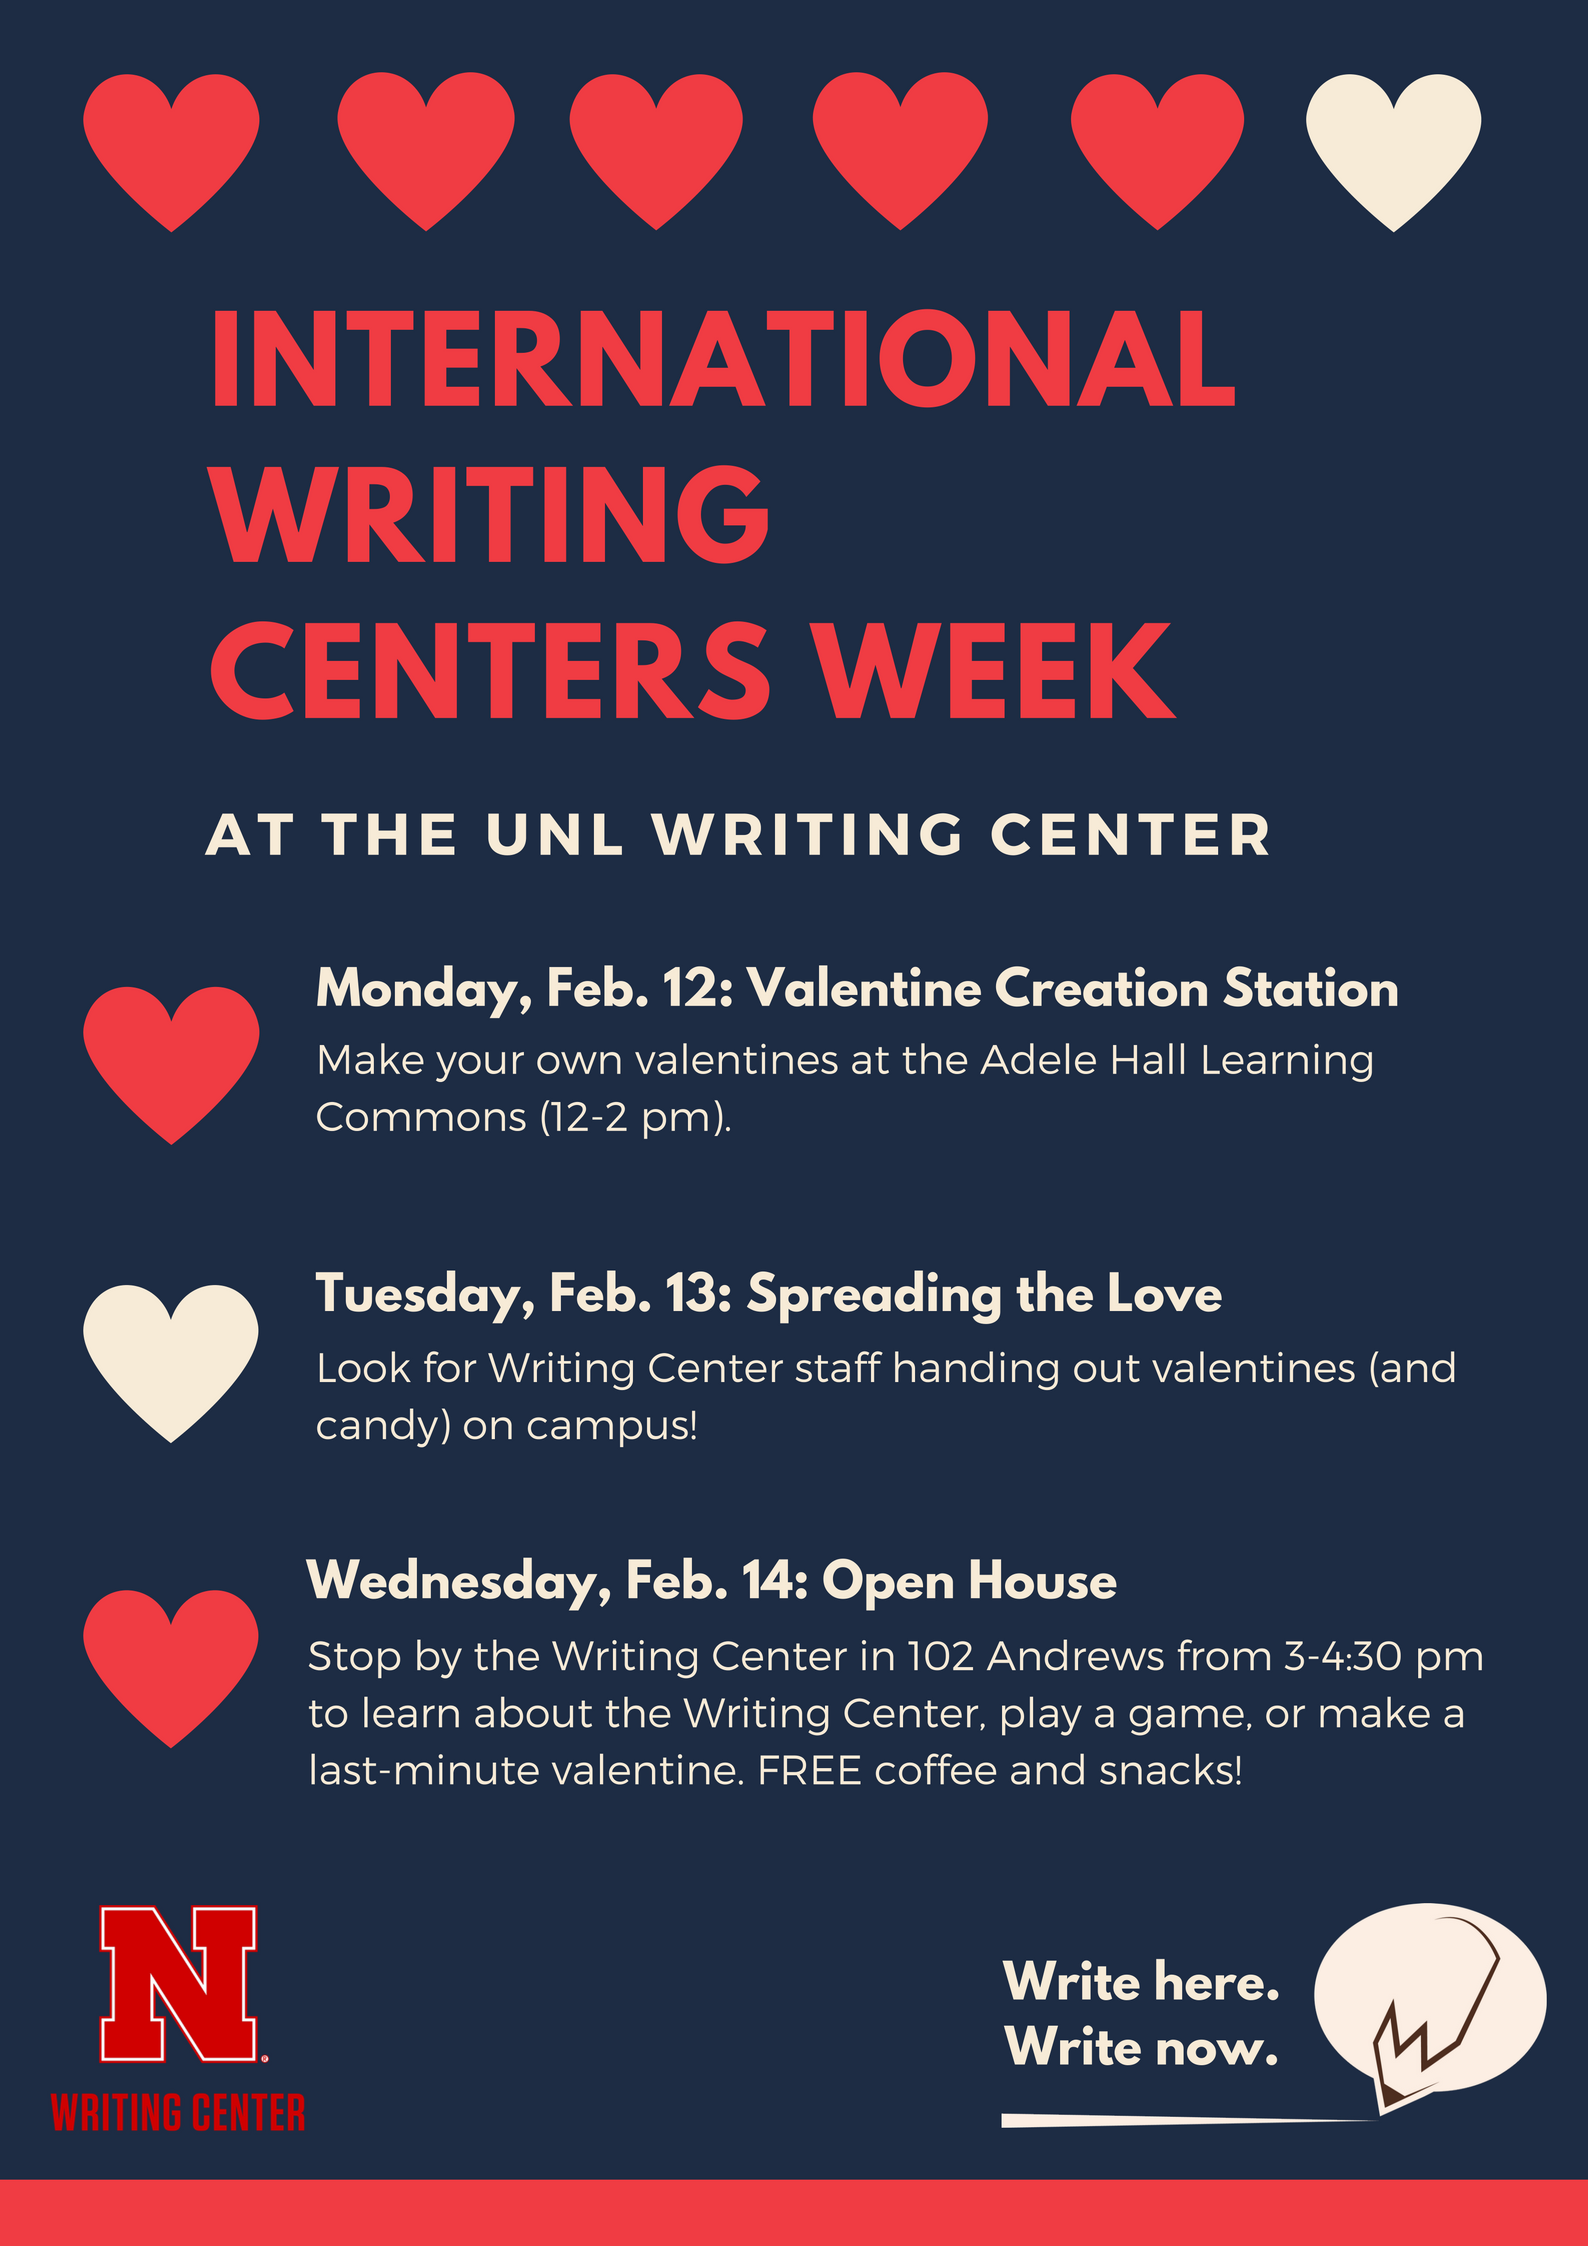 International Writing Centers Week at the Writing Center